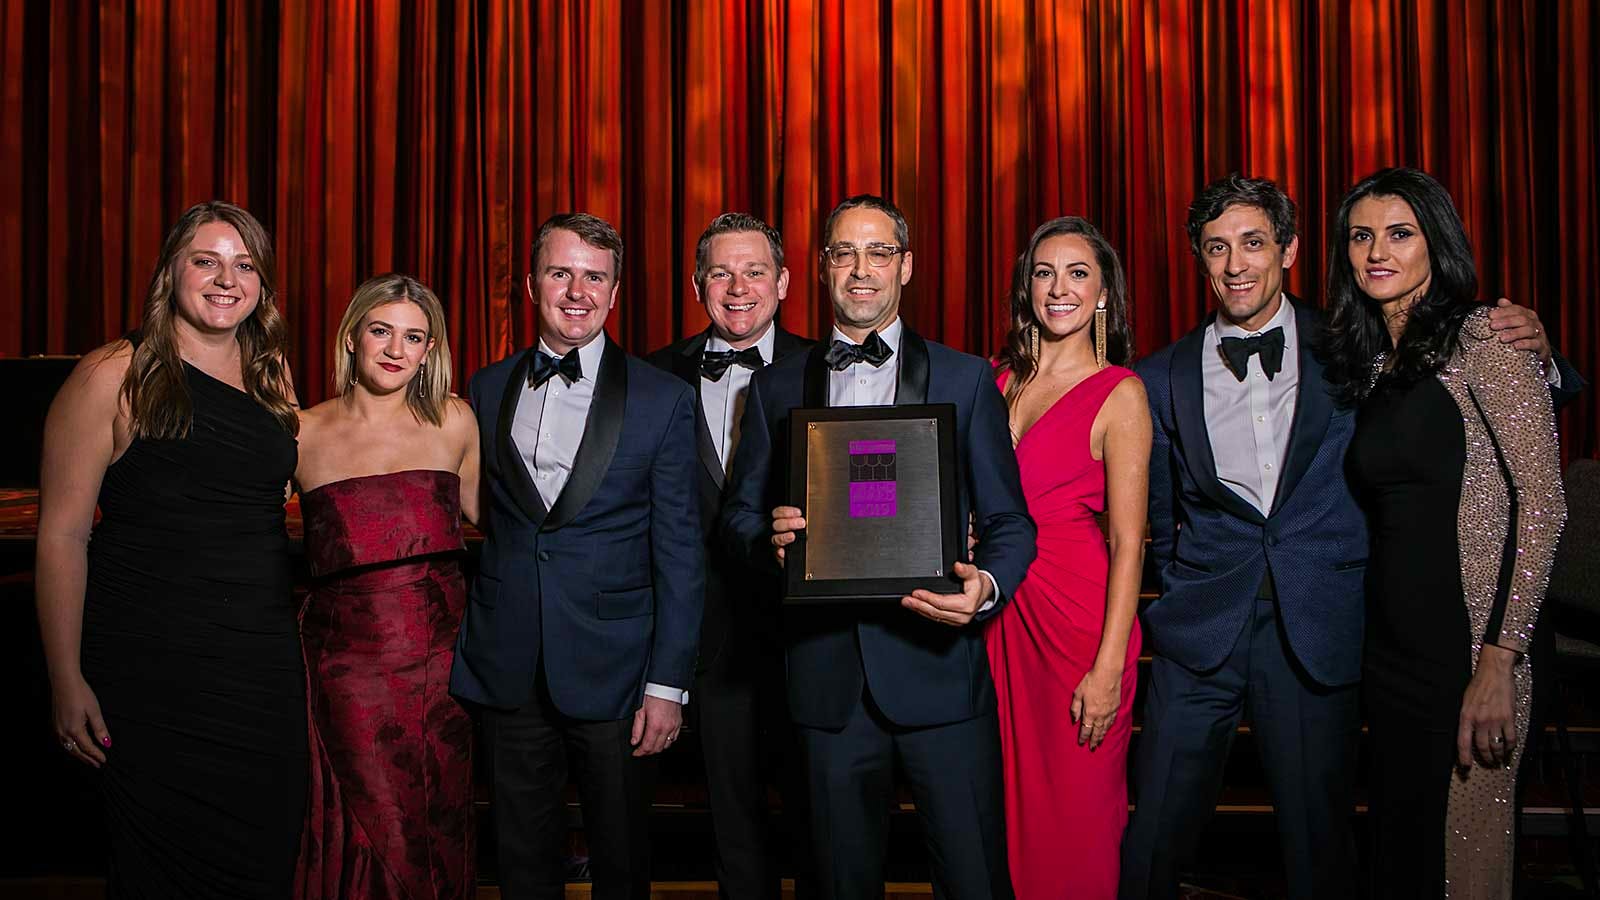 Wine director John Slover (holding plaque) and his team accept the Grand Award for the Pool in New York